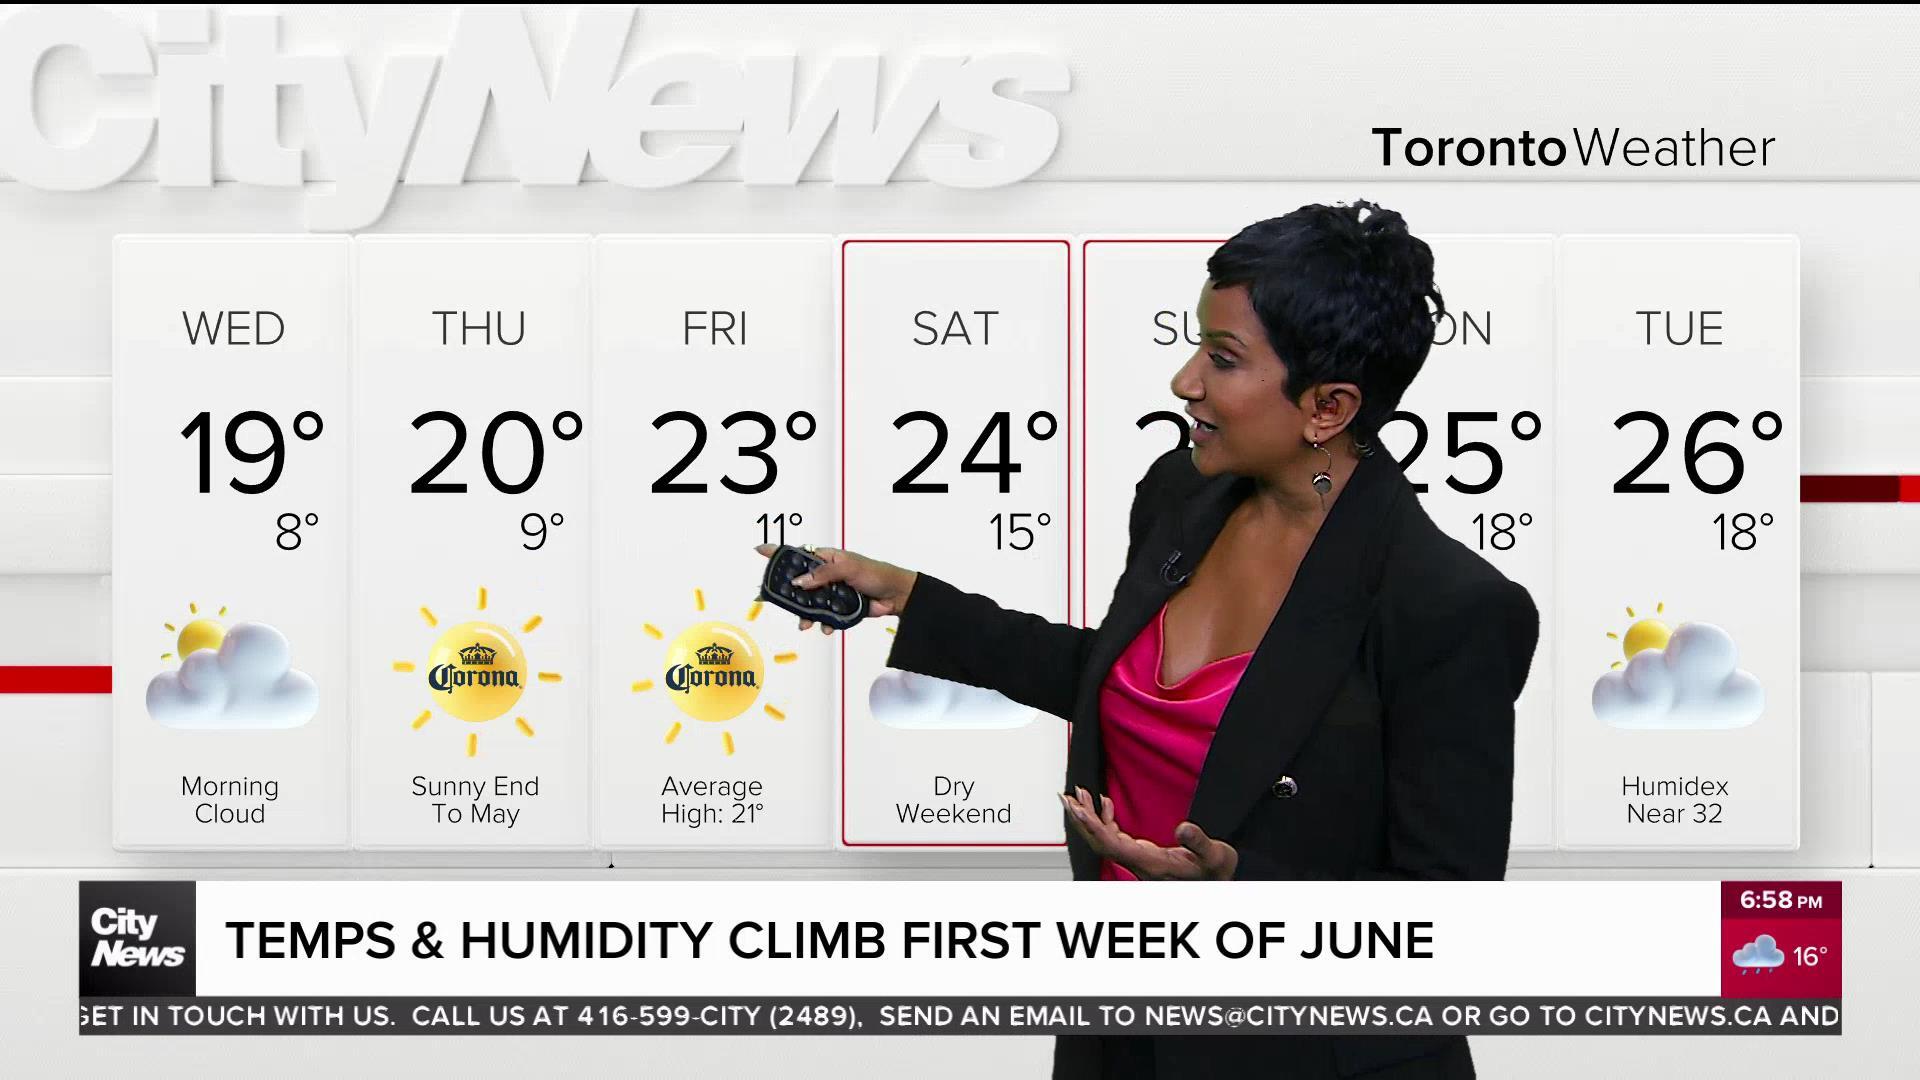 Temperatures and humidity climb in the first week of June